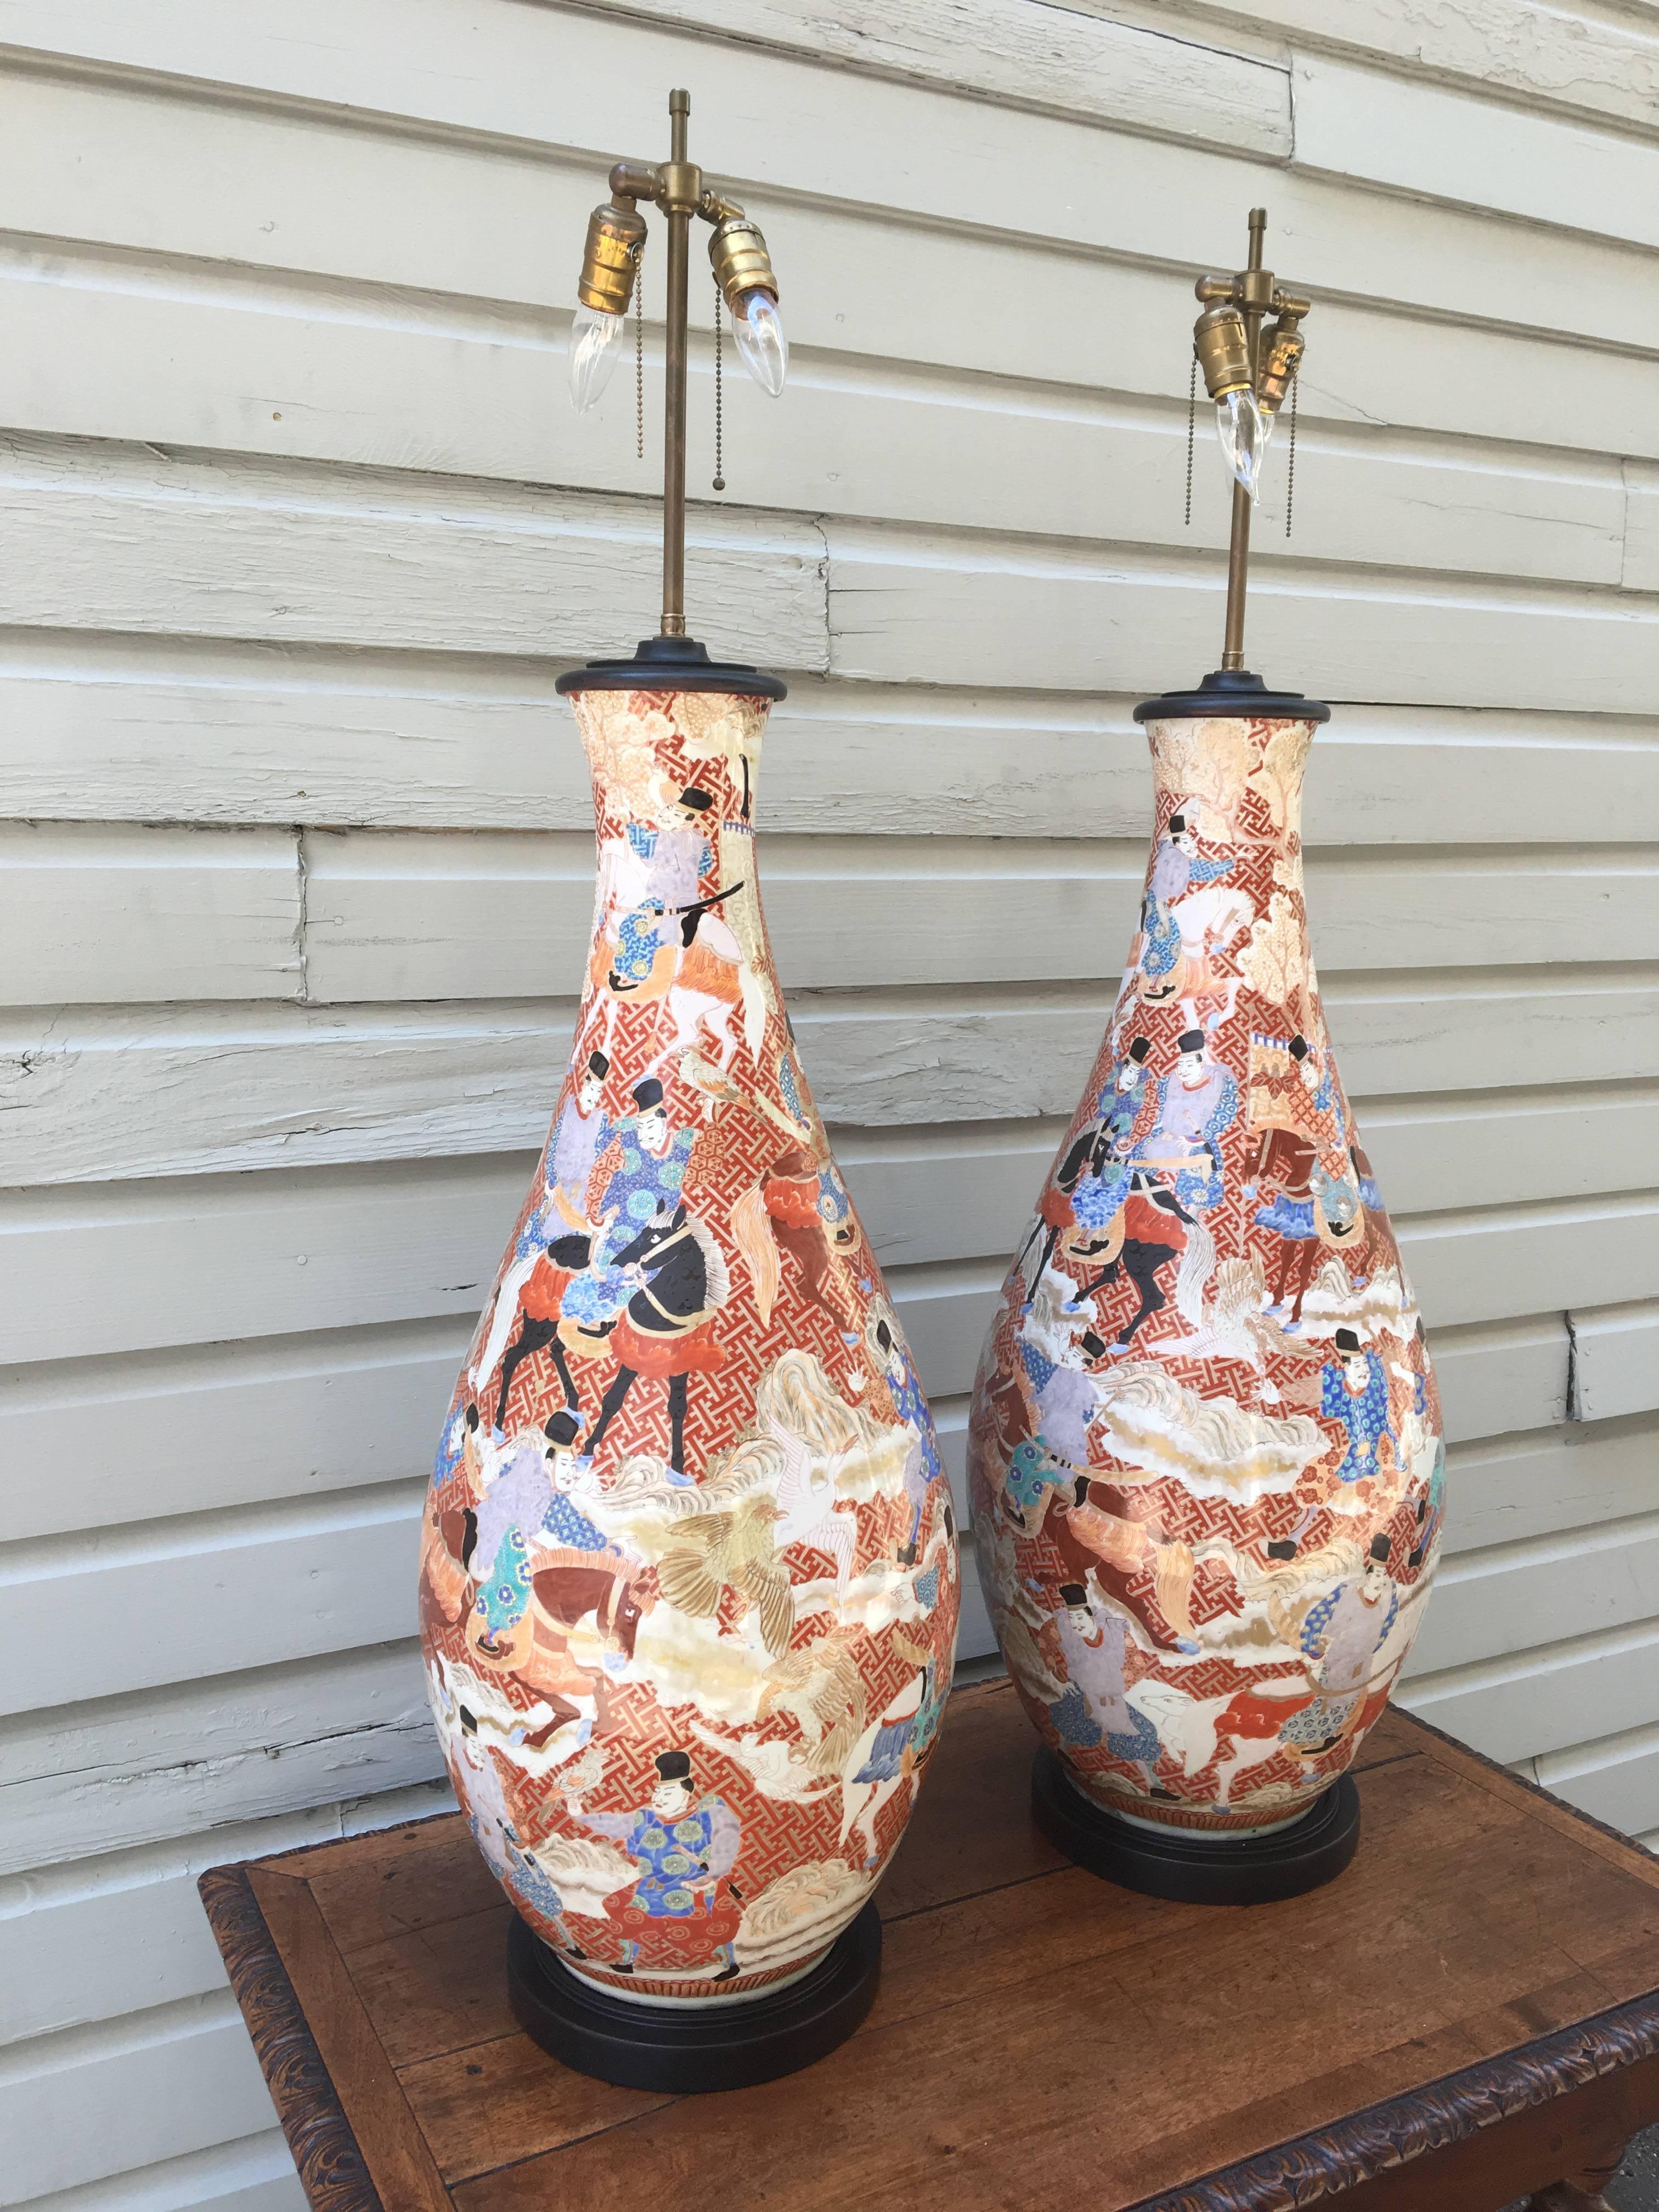 A palatial pair of Japanese Kutani porcelain vases from the Meiji period, circa 1870, wired as lamps. The pair sand at approximately four feet in height and have a sophisticated yet earthy palette.